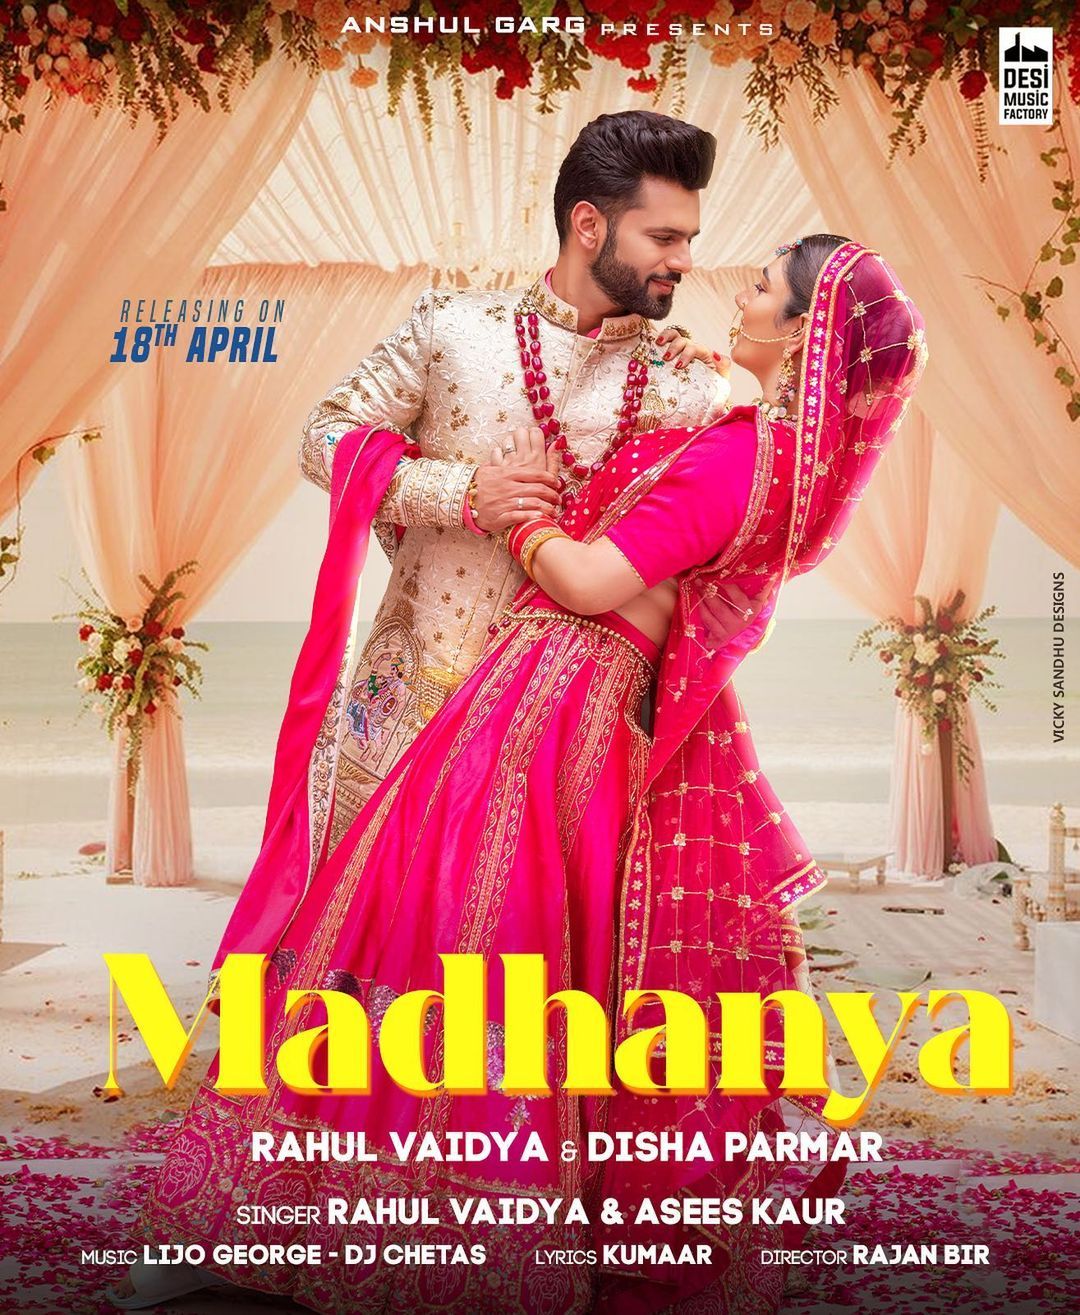 Rahul Vaidya And Disha Parmar Share Poster Of Their ‘Wedding Love Song’ Madhanya; Announce The Release Date